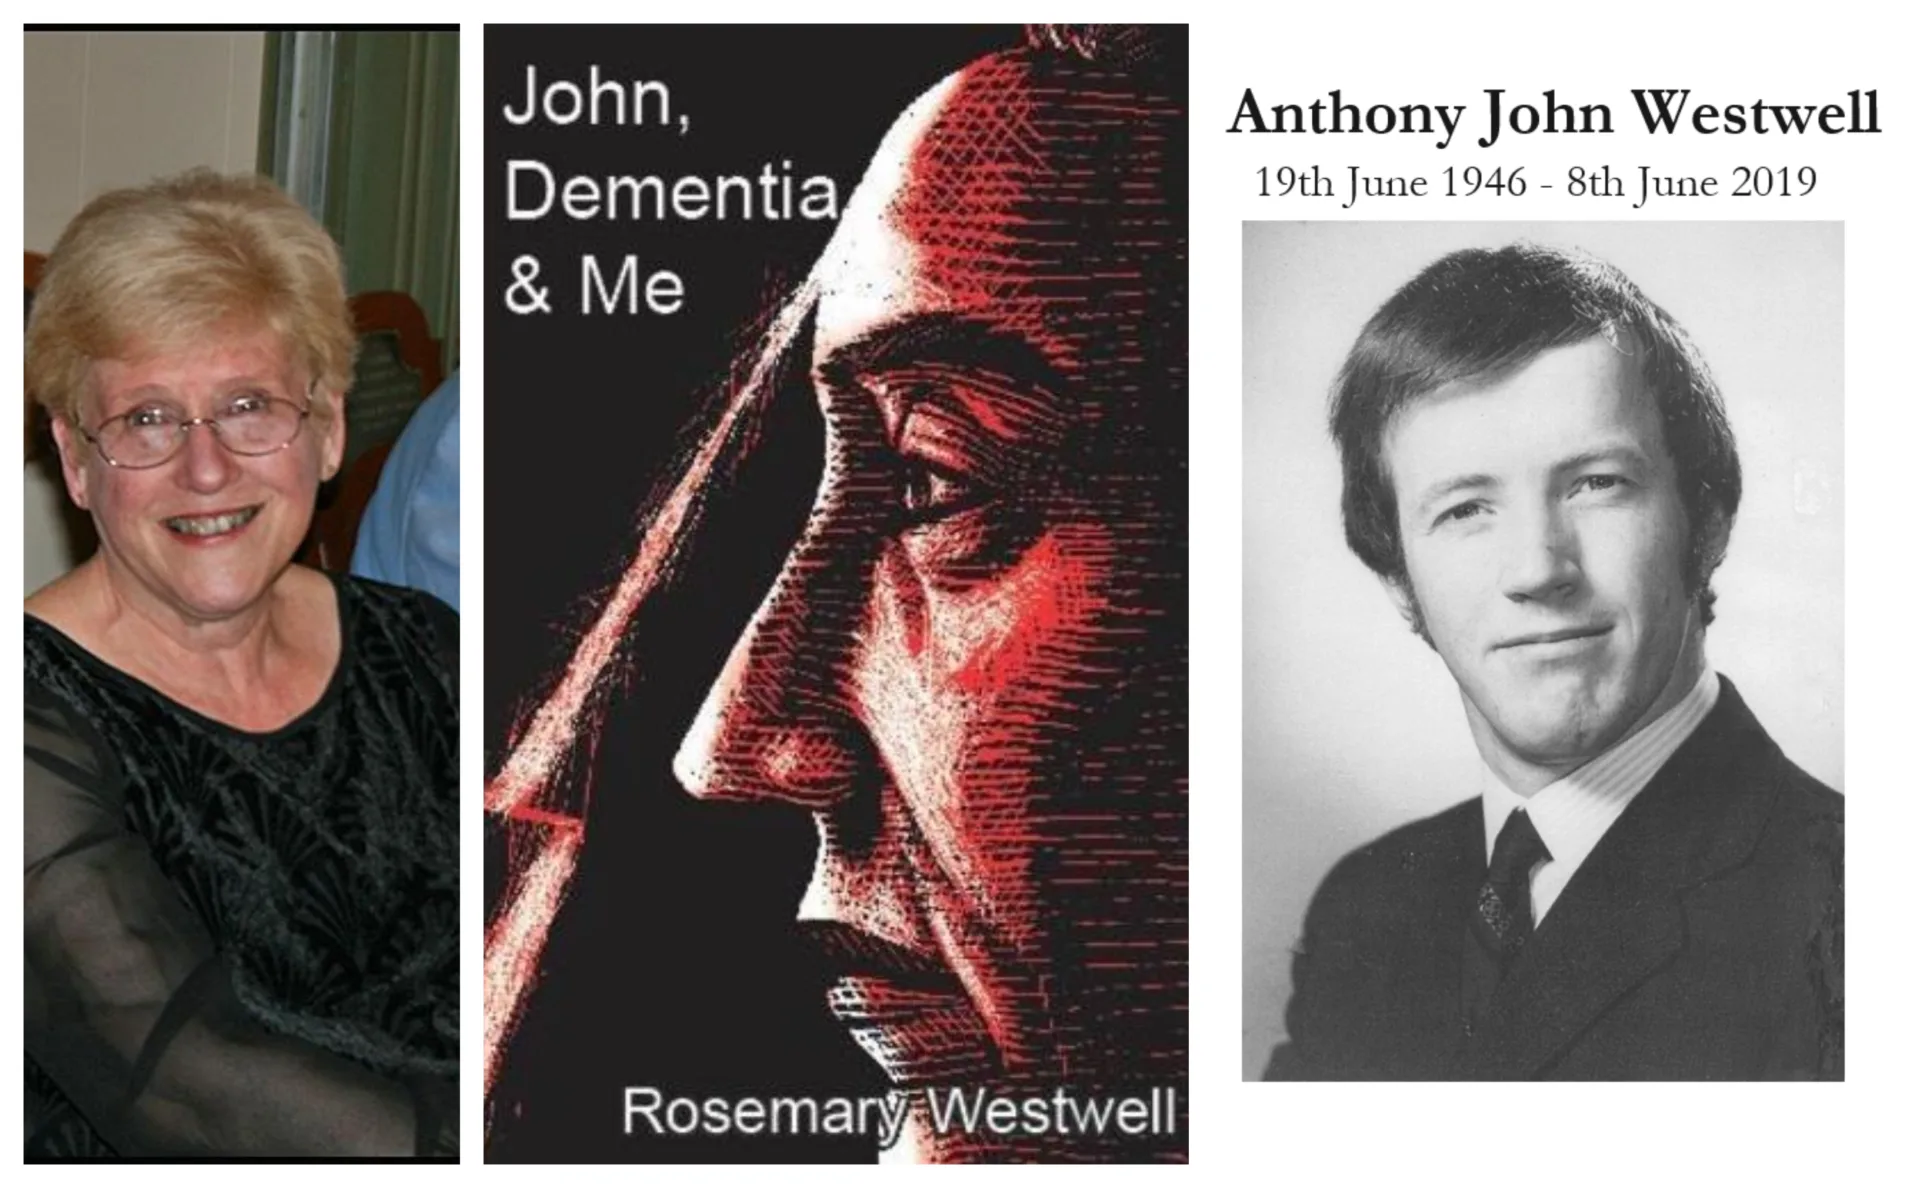 n 2014, Rosemary gave a talk to the Rotary Club of March. Dr Westwell talked about her husband John who suffered from dementia for 22 years. She described how it had affected her and her family and how it had prompted her to write a book John, Dementia and Me